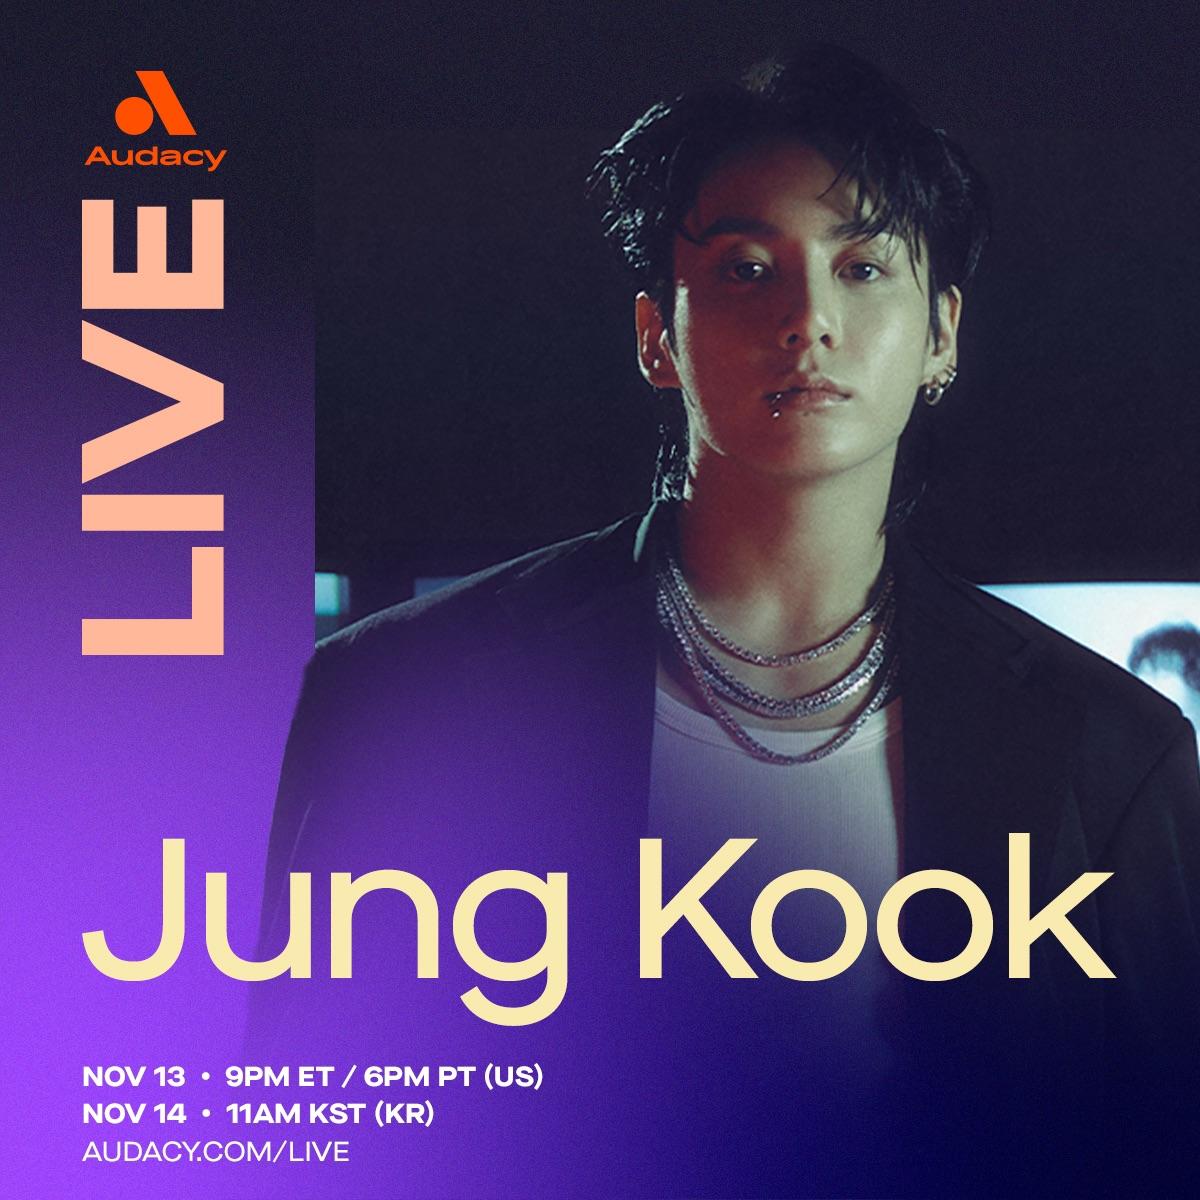 [Audacy] Only a couple more days until we’re “Standing Next To You,” BTS’ Jung Kook! Don’t miss the Audacy Live performance Mon, 11/13 at 9 PM ET / Tue, 11/14 at 11 AM KST - 121123